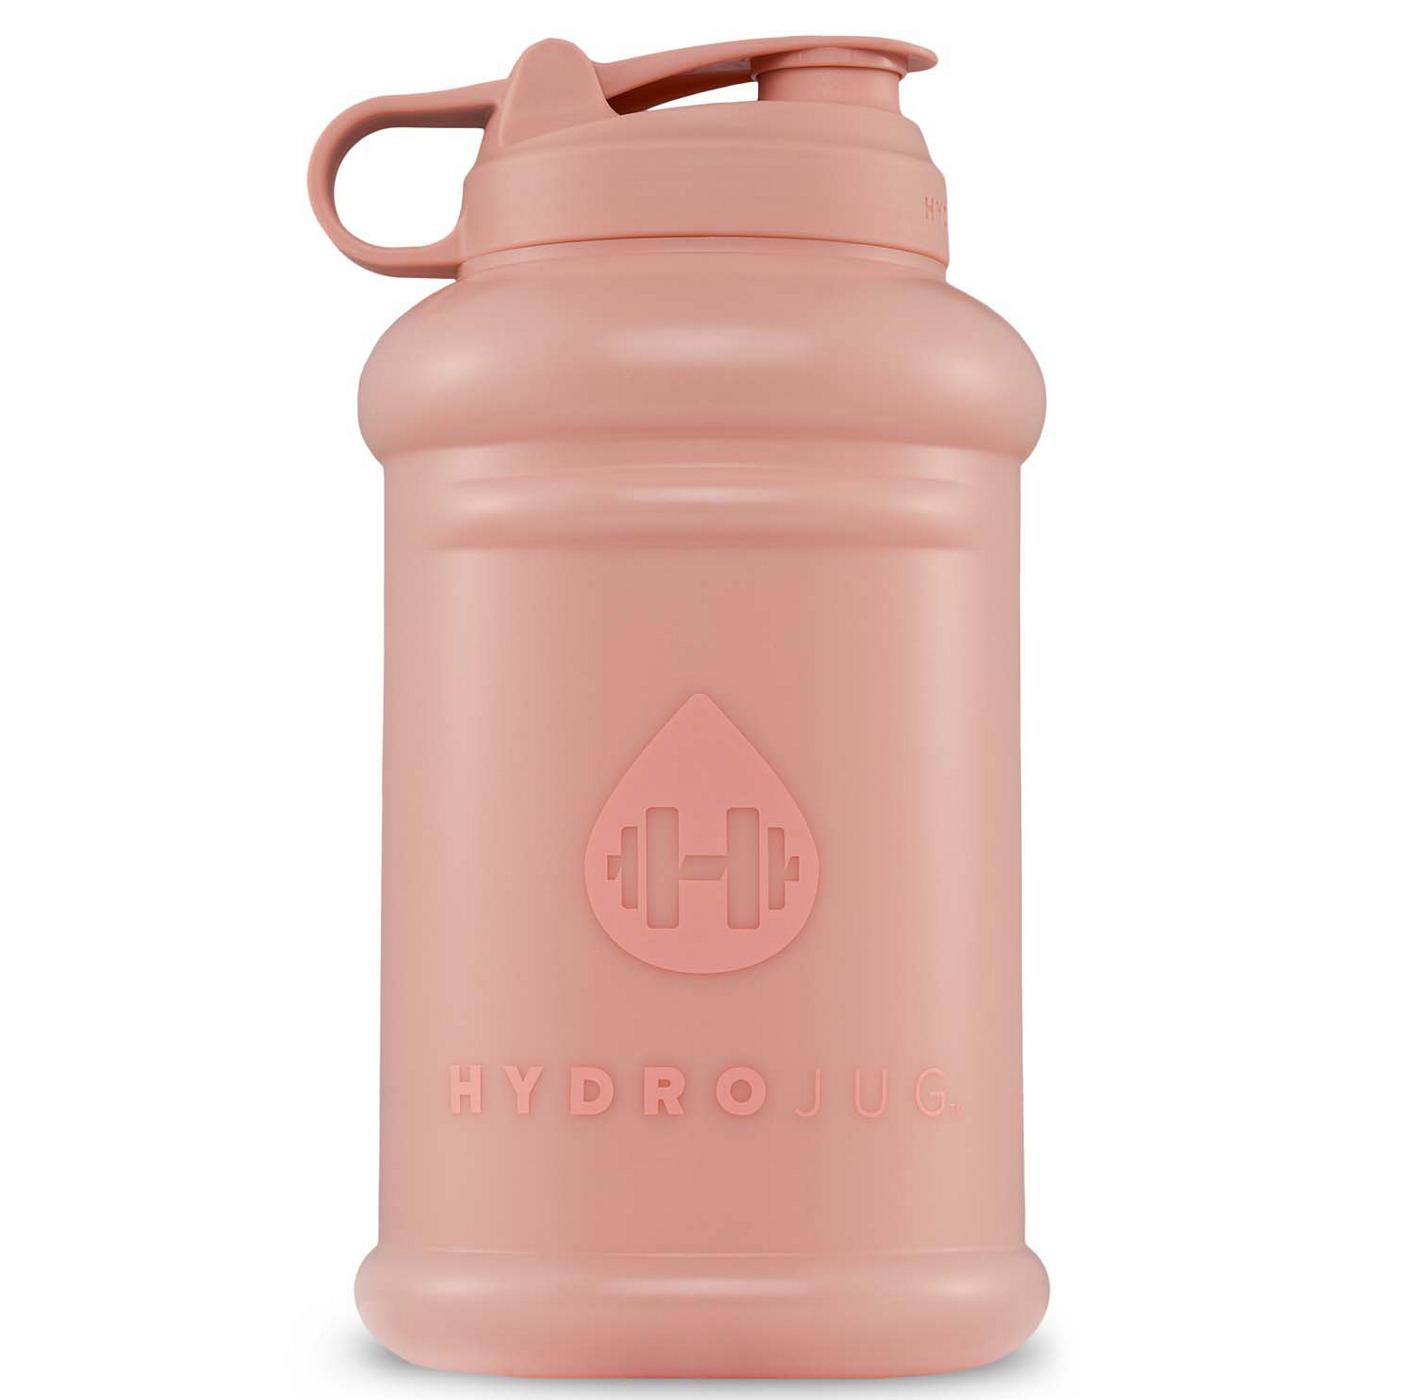 HydroJug Neutral Pro Water Bottle - Nude - Shop Travel & To-Go at H-E-B